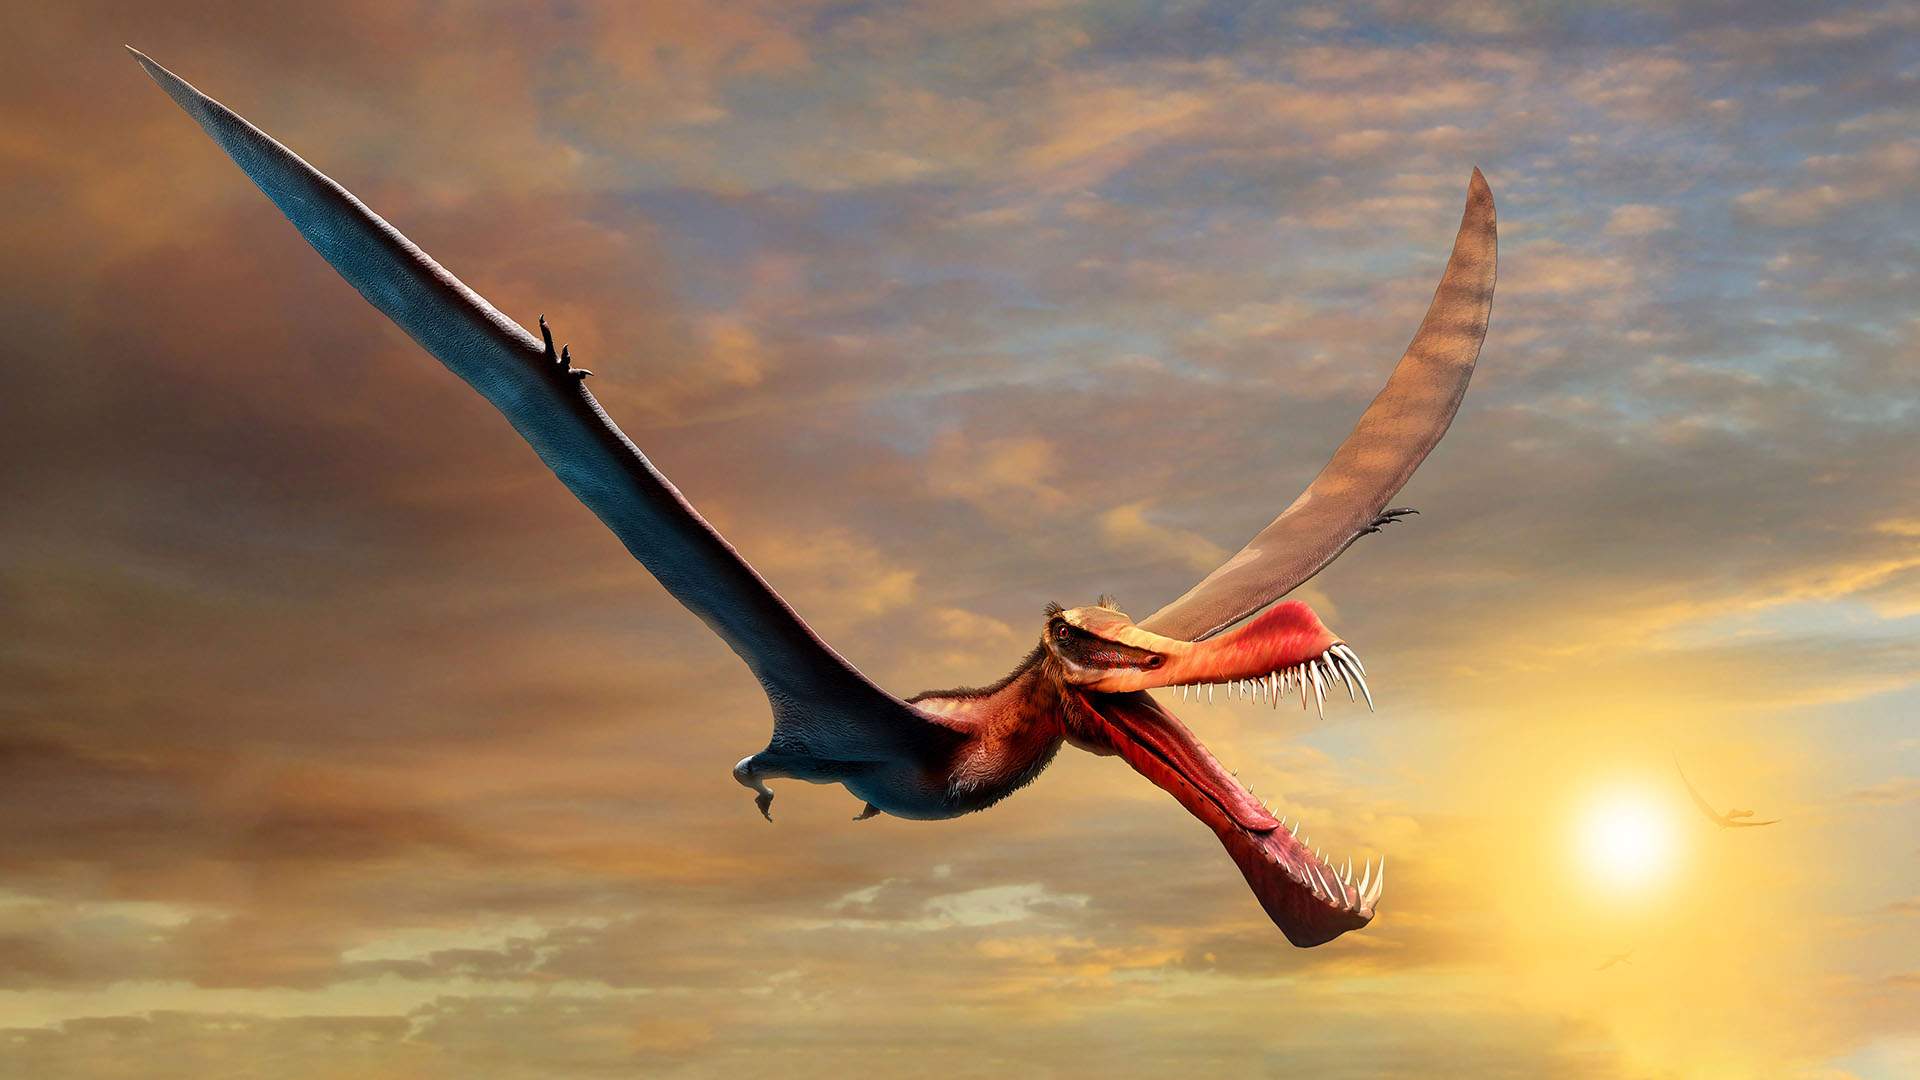 This Just-Discovered Flying Reptile Once Soared Through Australia's Prehistoric Skies Like a Dragon